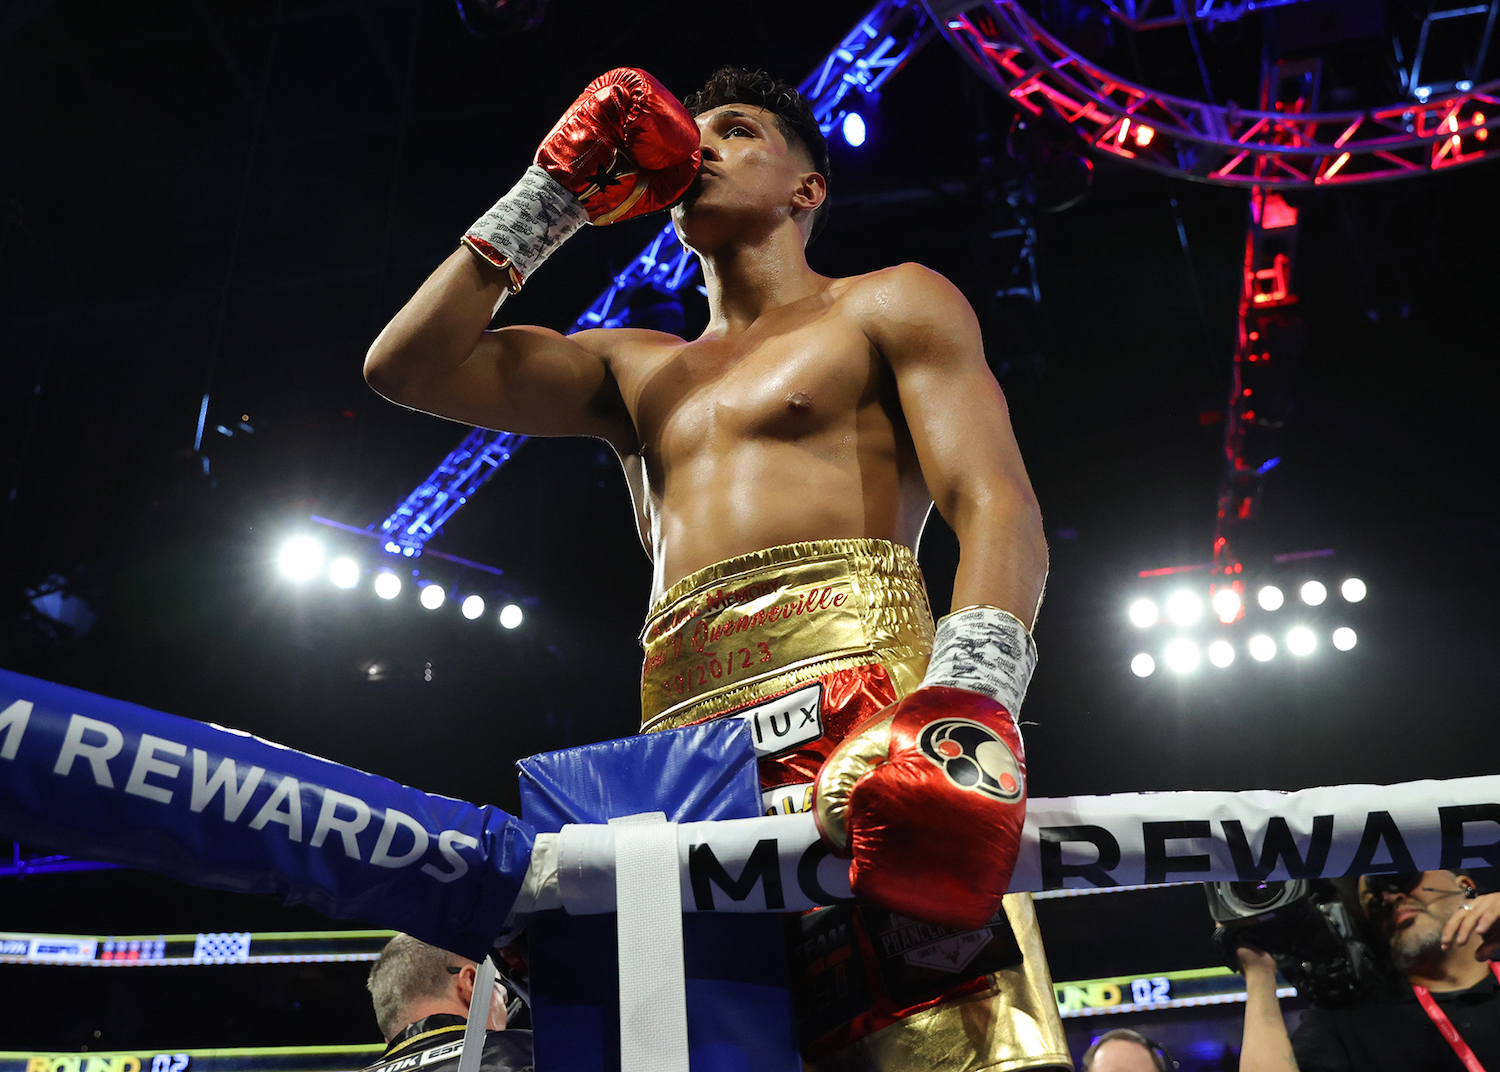 Highlights: Vargas wins in the second round, and looks like one of boxing's most improved fighters